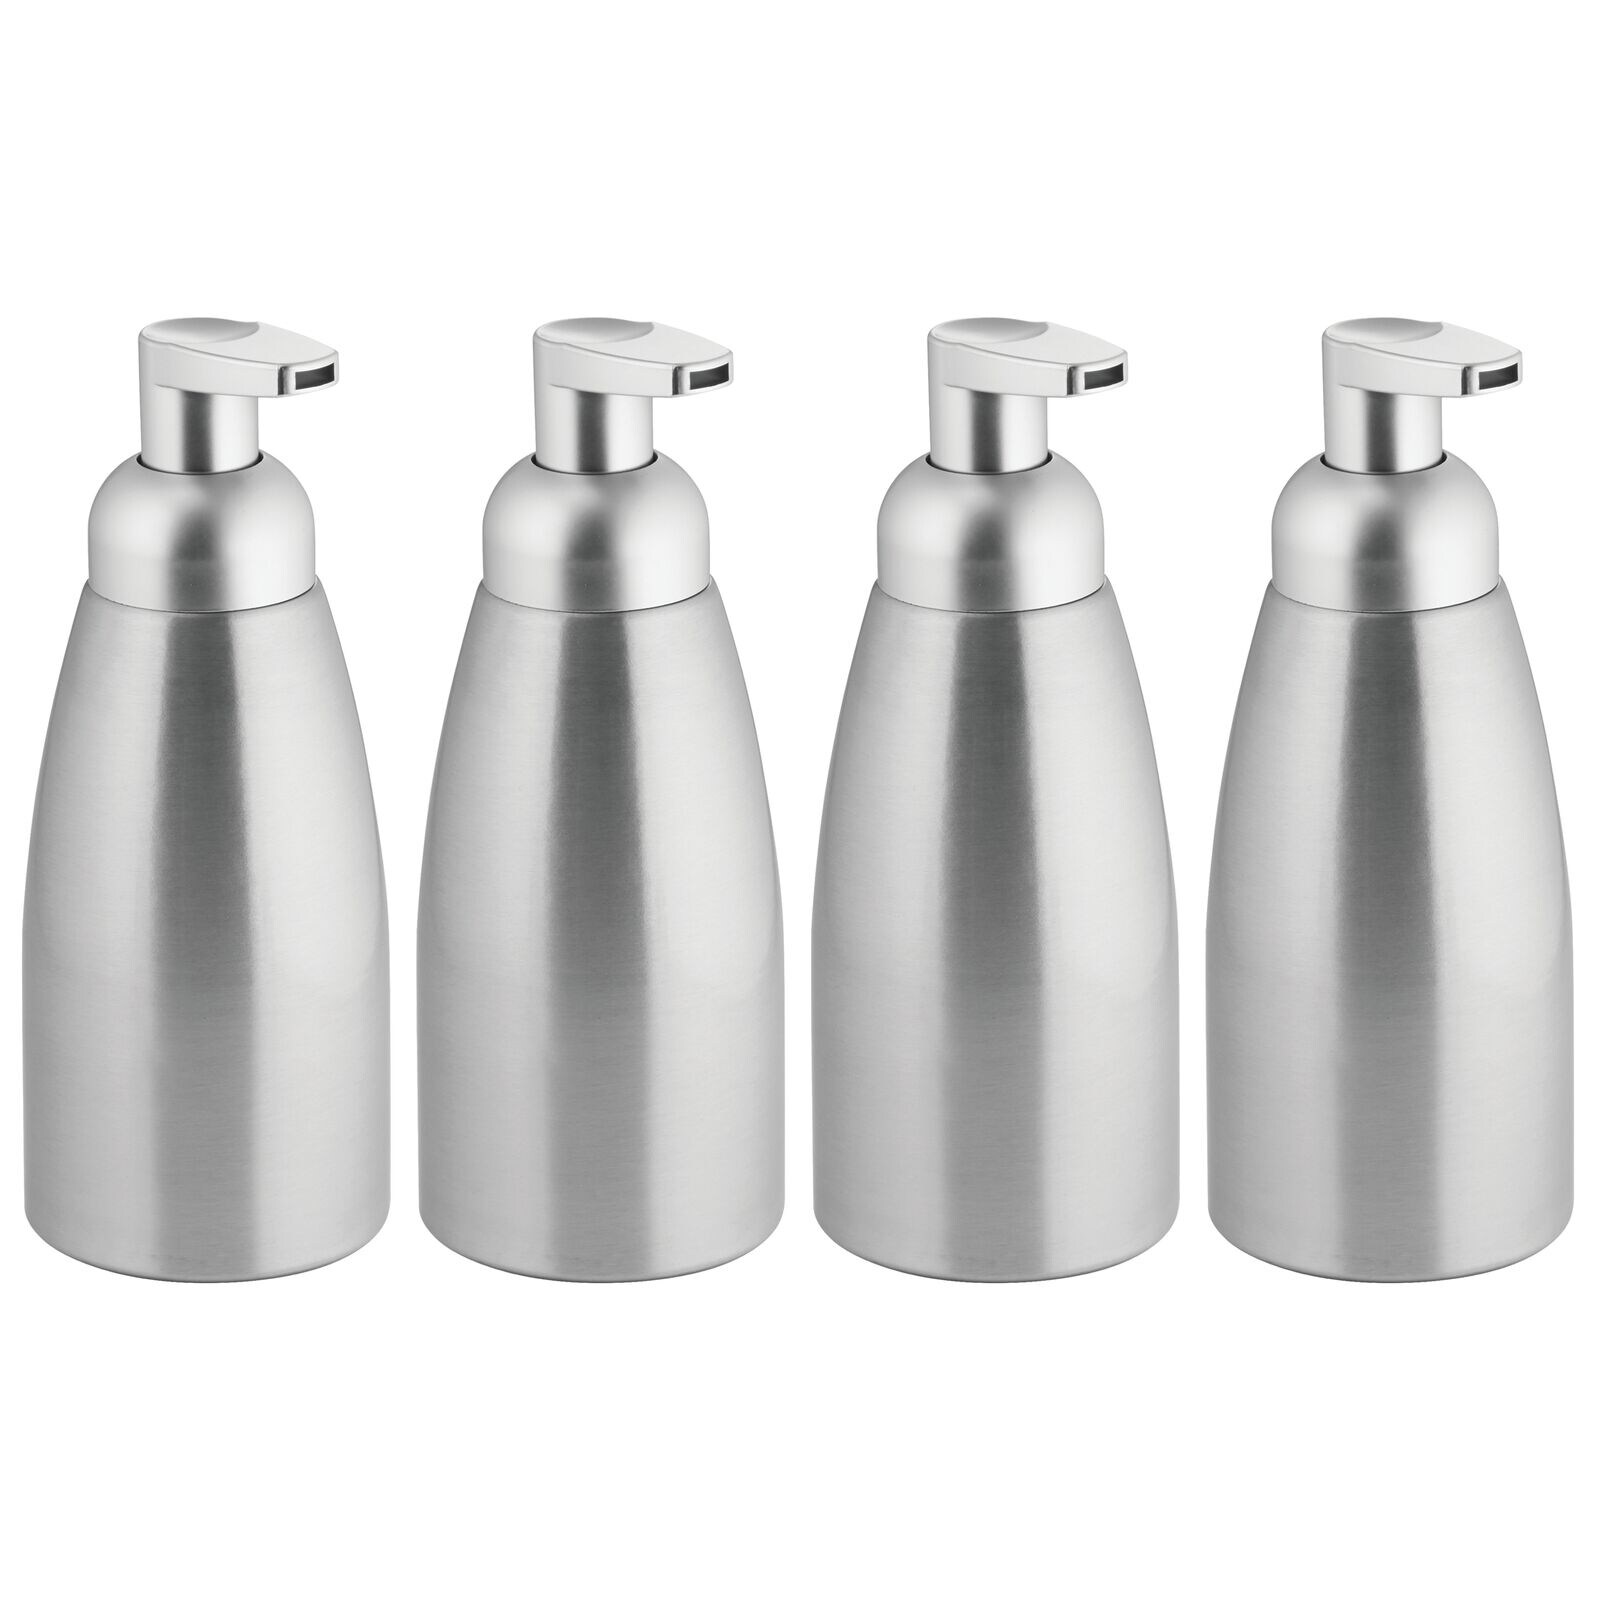 https://ak1.ostkcdn.com/images/products/is/images/direct/c4a8f2ed2dddb9324460a371b23294bc6c51e968/mDesign-Aluminum-Foaming-Soap-Dispenser-Pump-Bottle%2C-4-Pack---Brushed-Silver.jpg